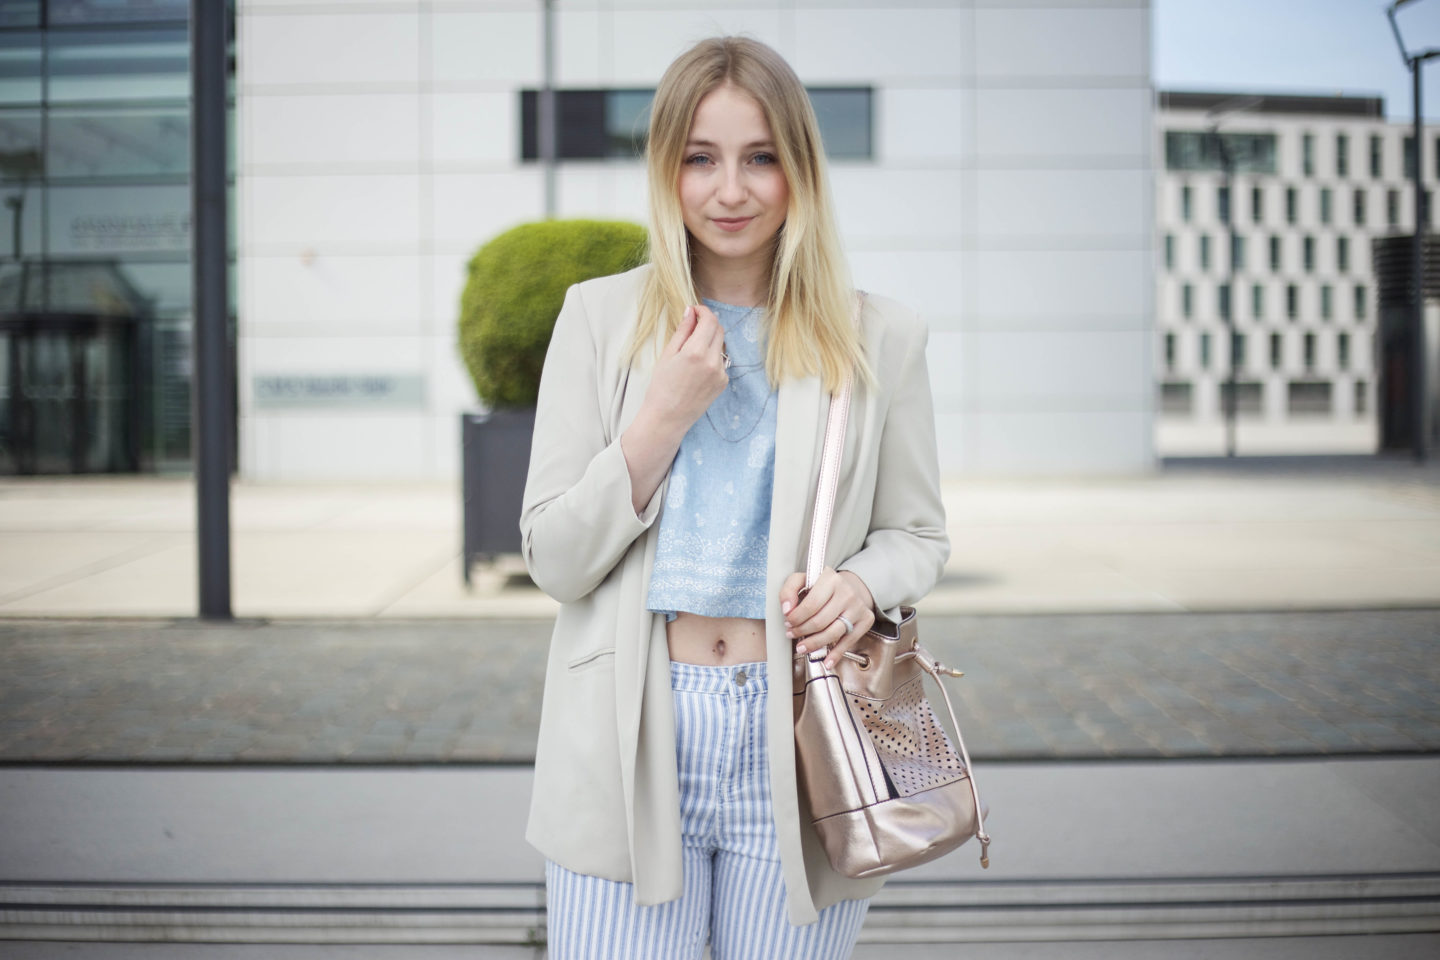 Striped Jeans und helle Farben Outfit